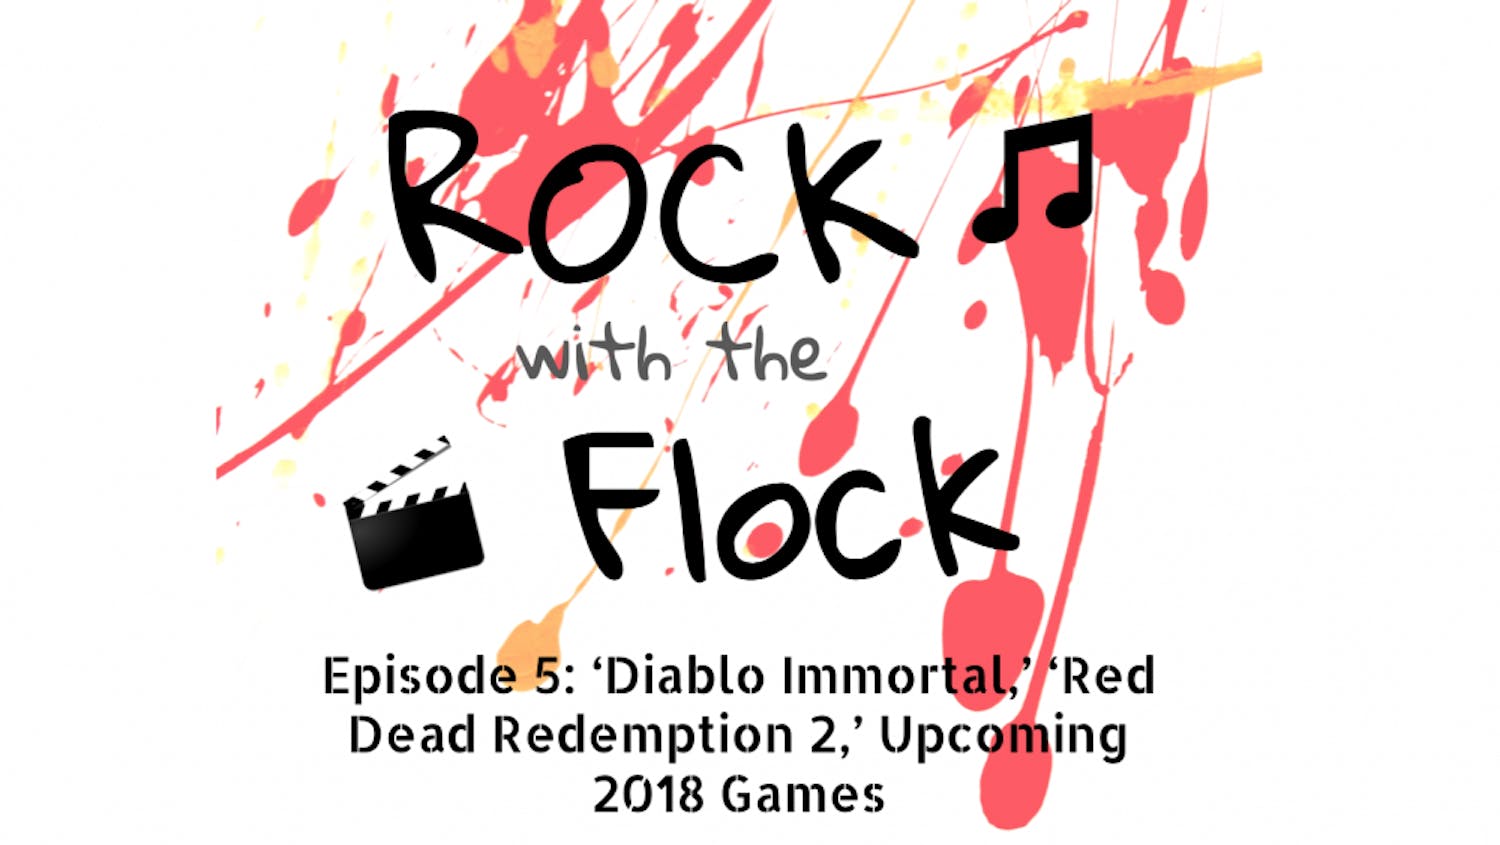 Tune in to new episodes of "Rock with the Flock" every Wednesday at 7 p.m.